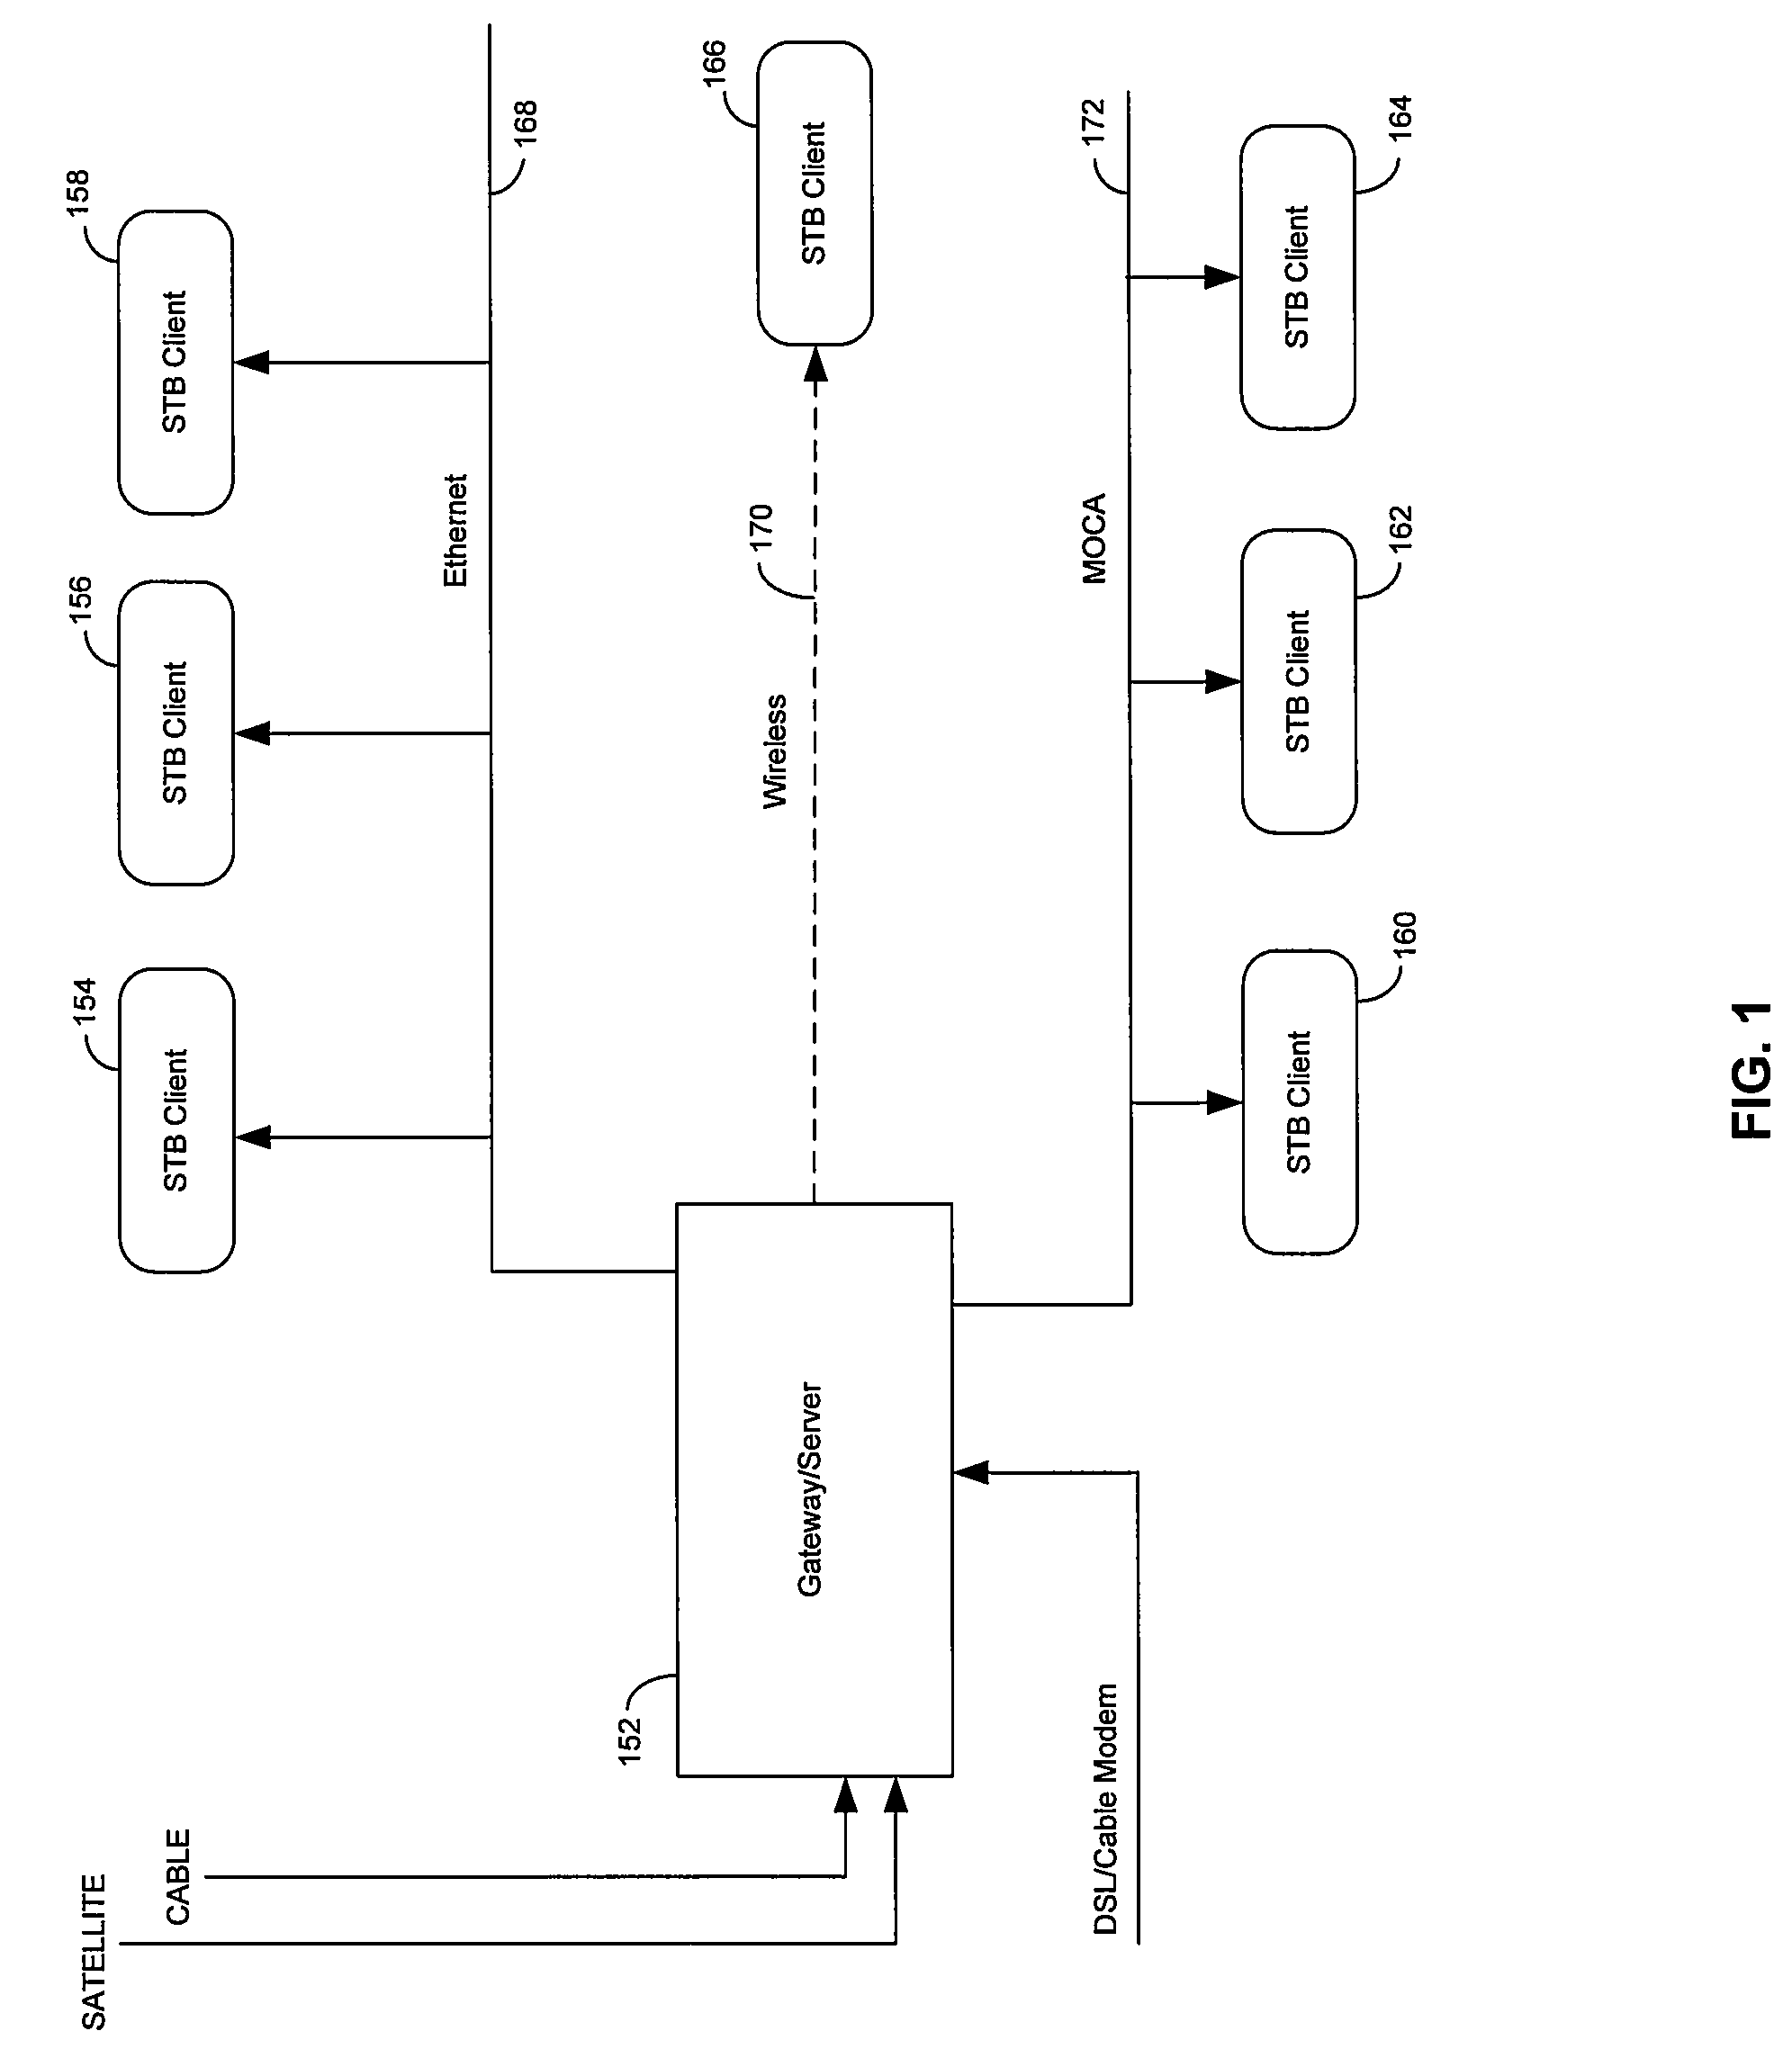 Method and system for dynamically adjusting forward error correction (FEC) rate to adapt for time varying network impairments in video streaming applications over IP networks